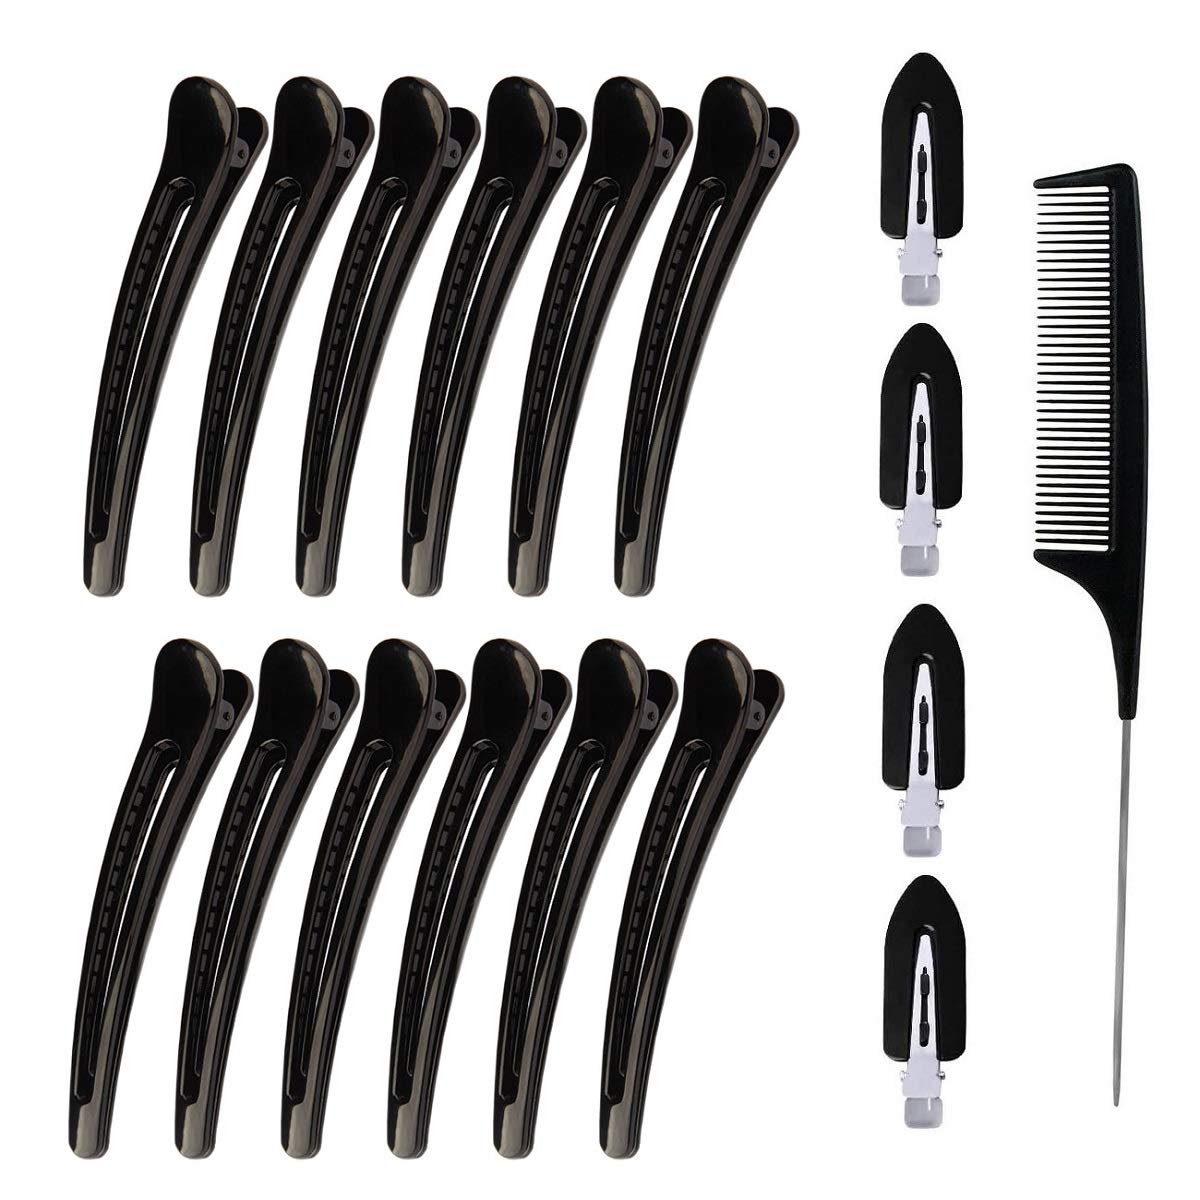 12pcs Hair Sectioning Clips Plastic Hairdresser Clamps+ 1pcs Tail Comb for Women Girls Hairdressing Styling Salon